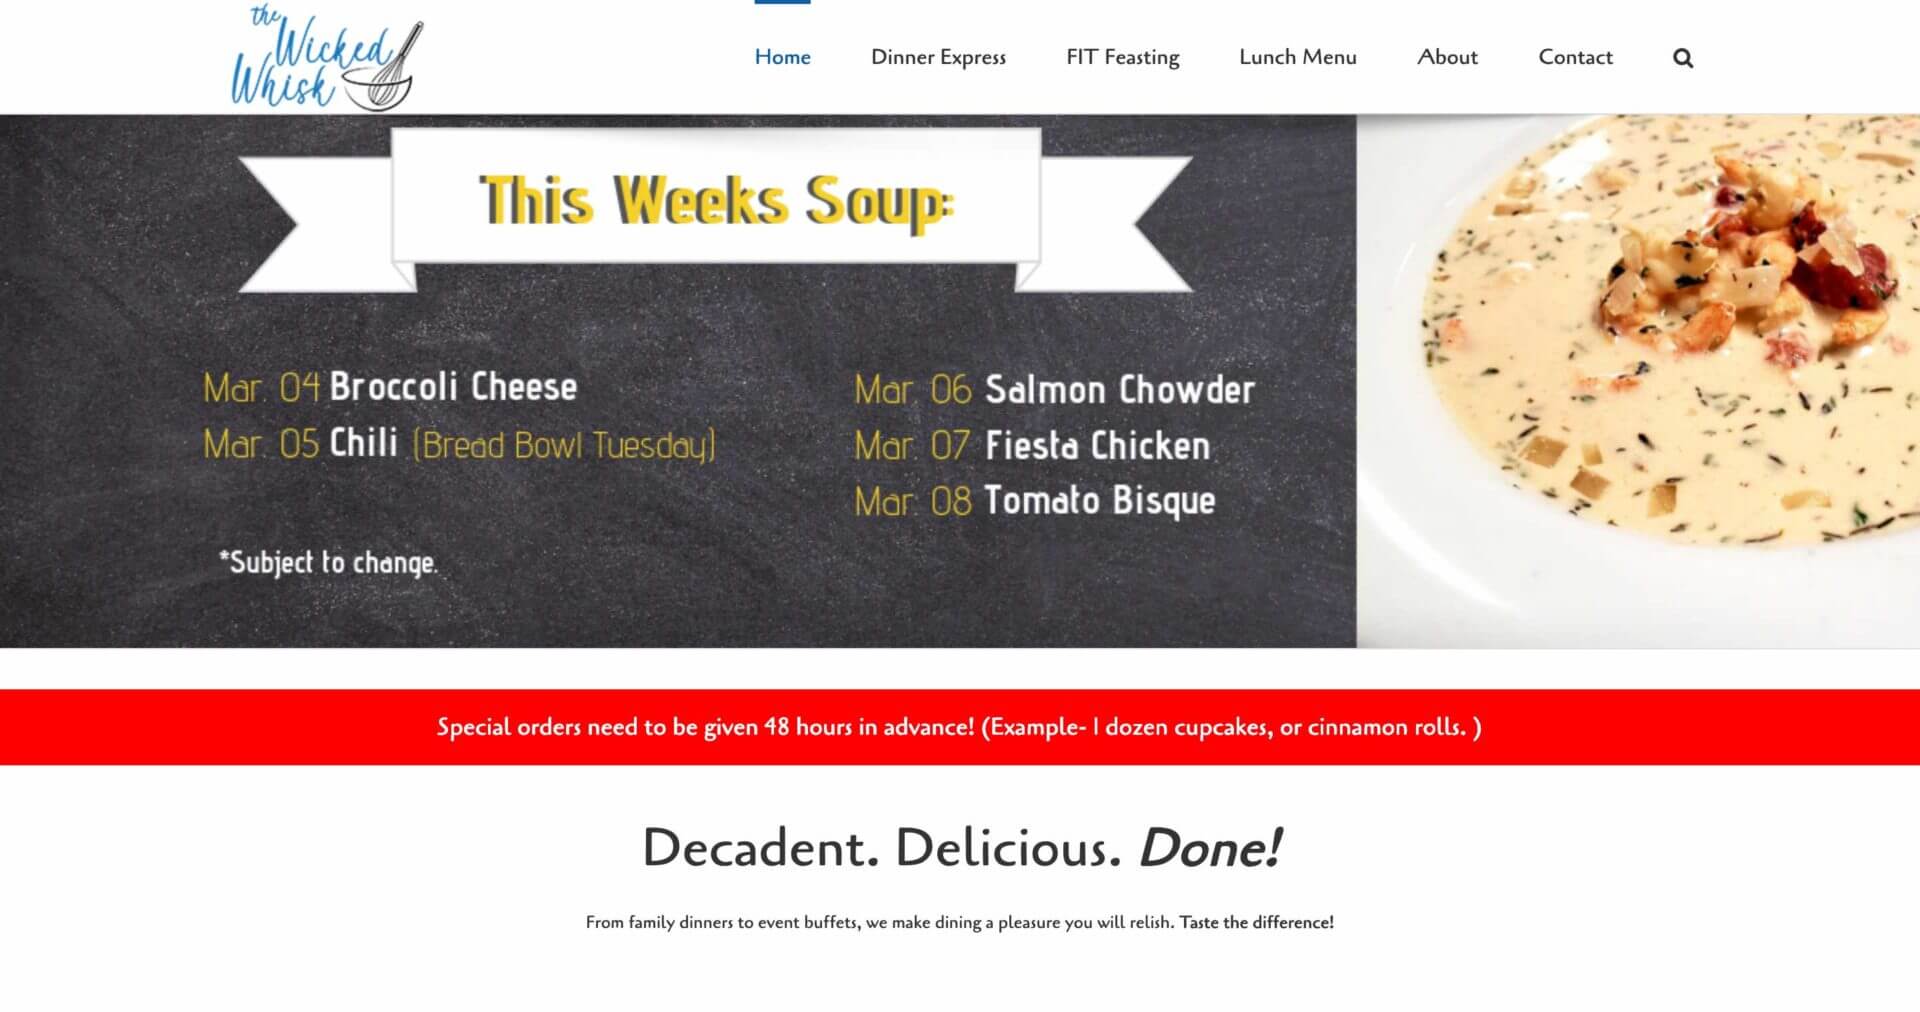 SO Services: The Wicked Whisk Homepage